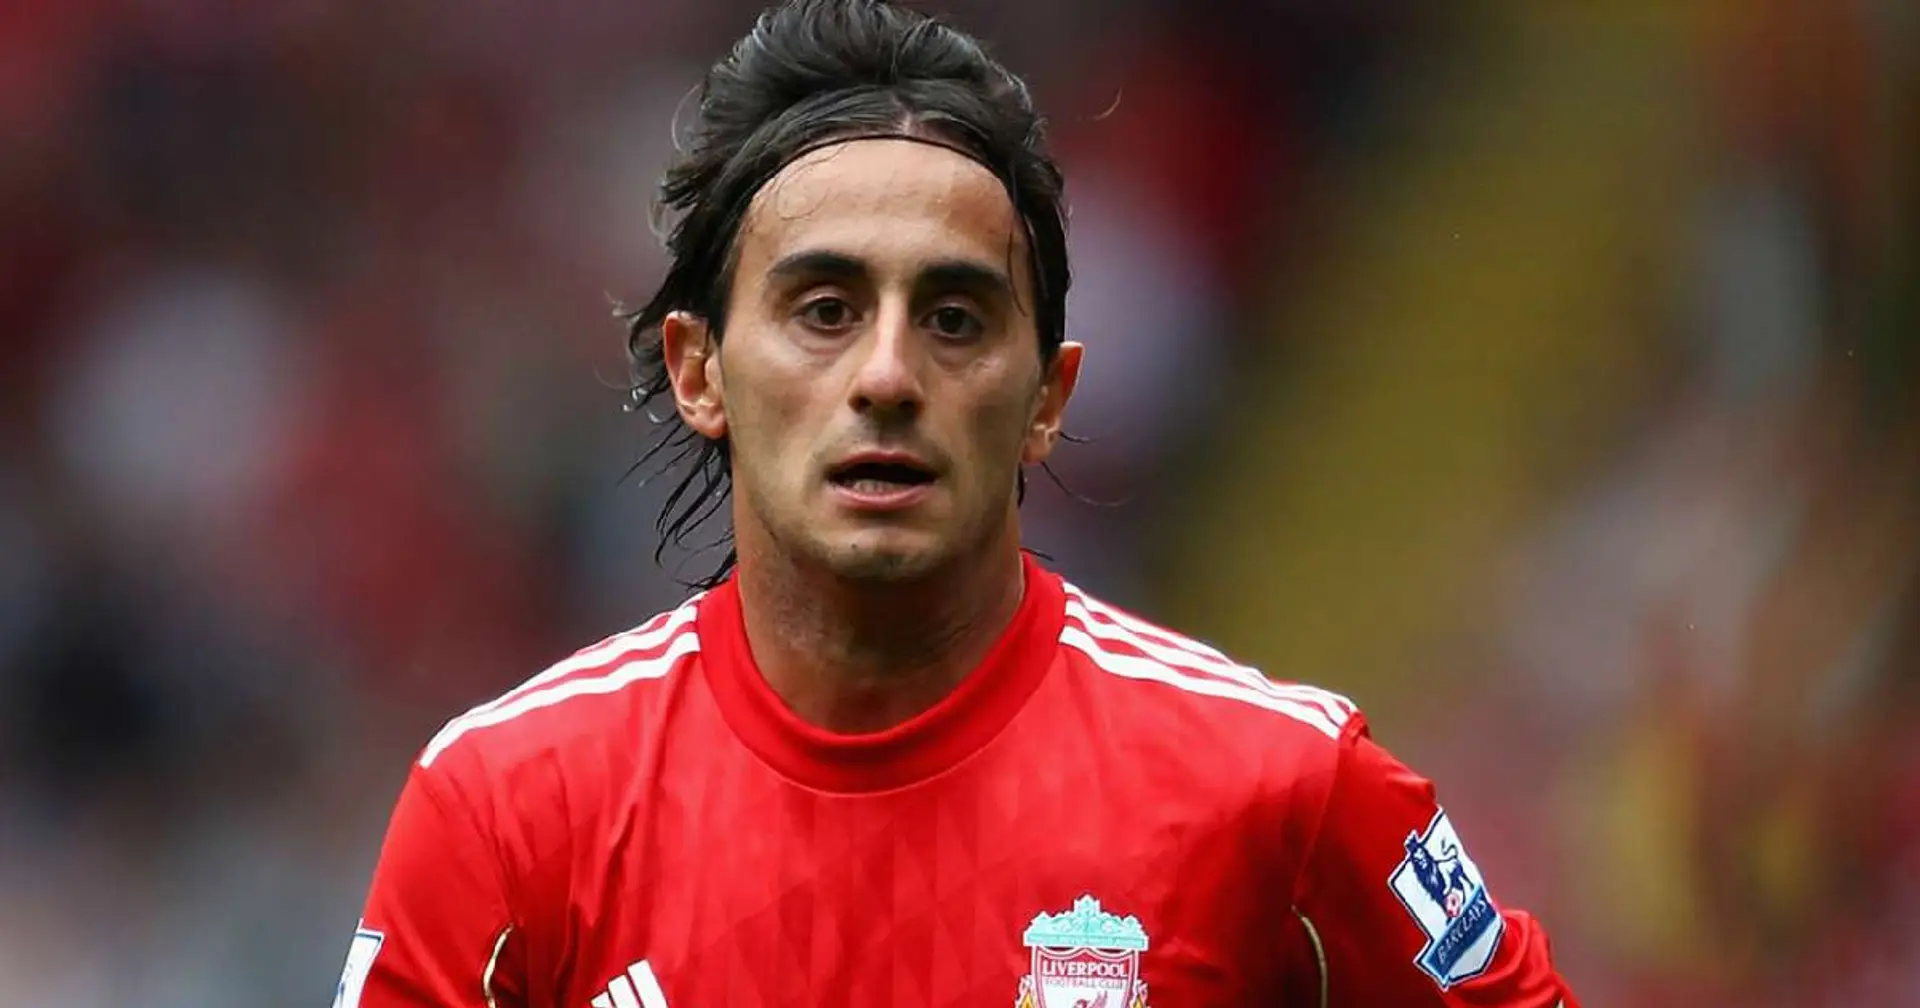 'The way I played was forgotten': Aquilani discusses the turning point of his Liverpool career